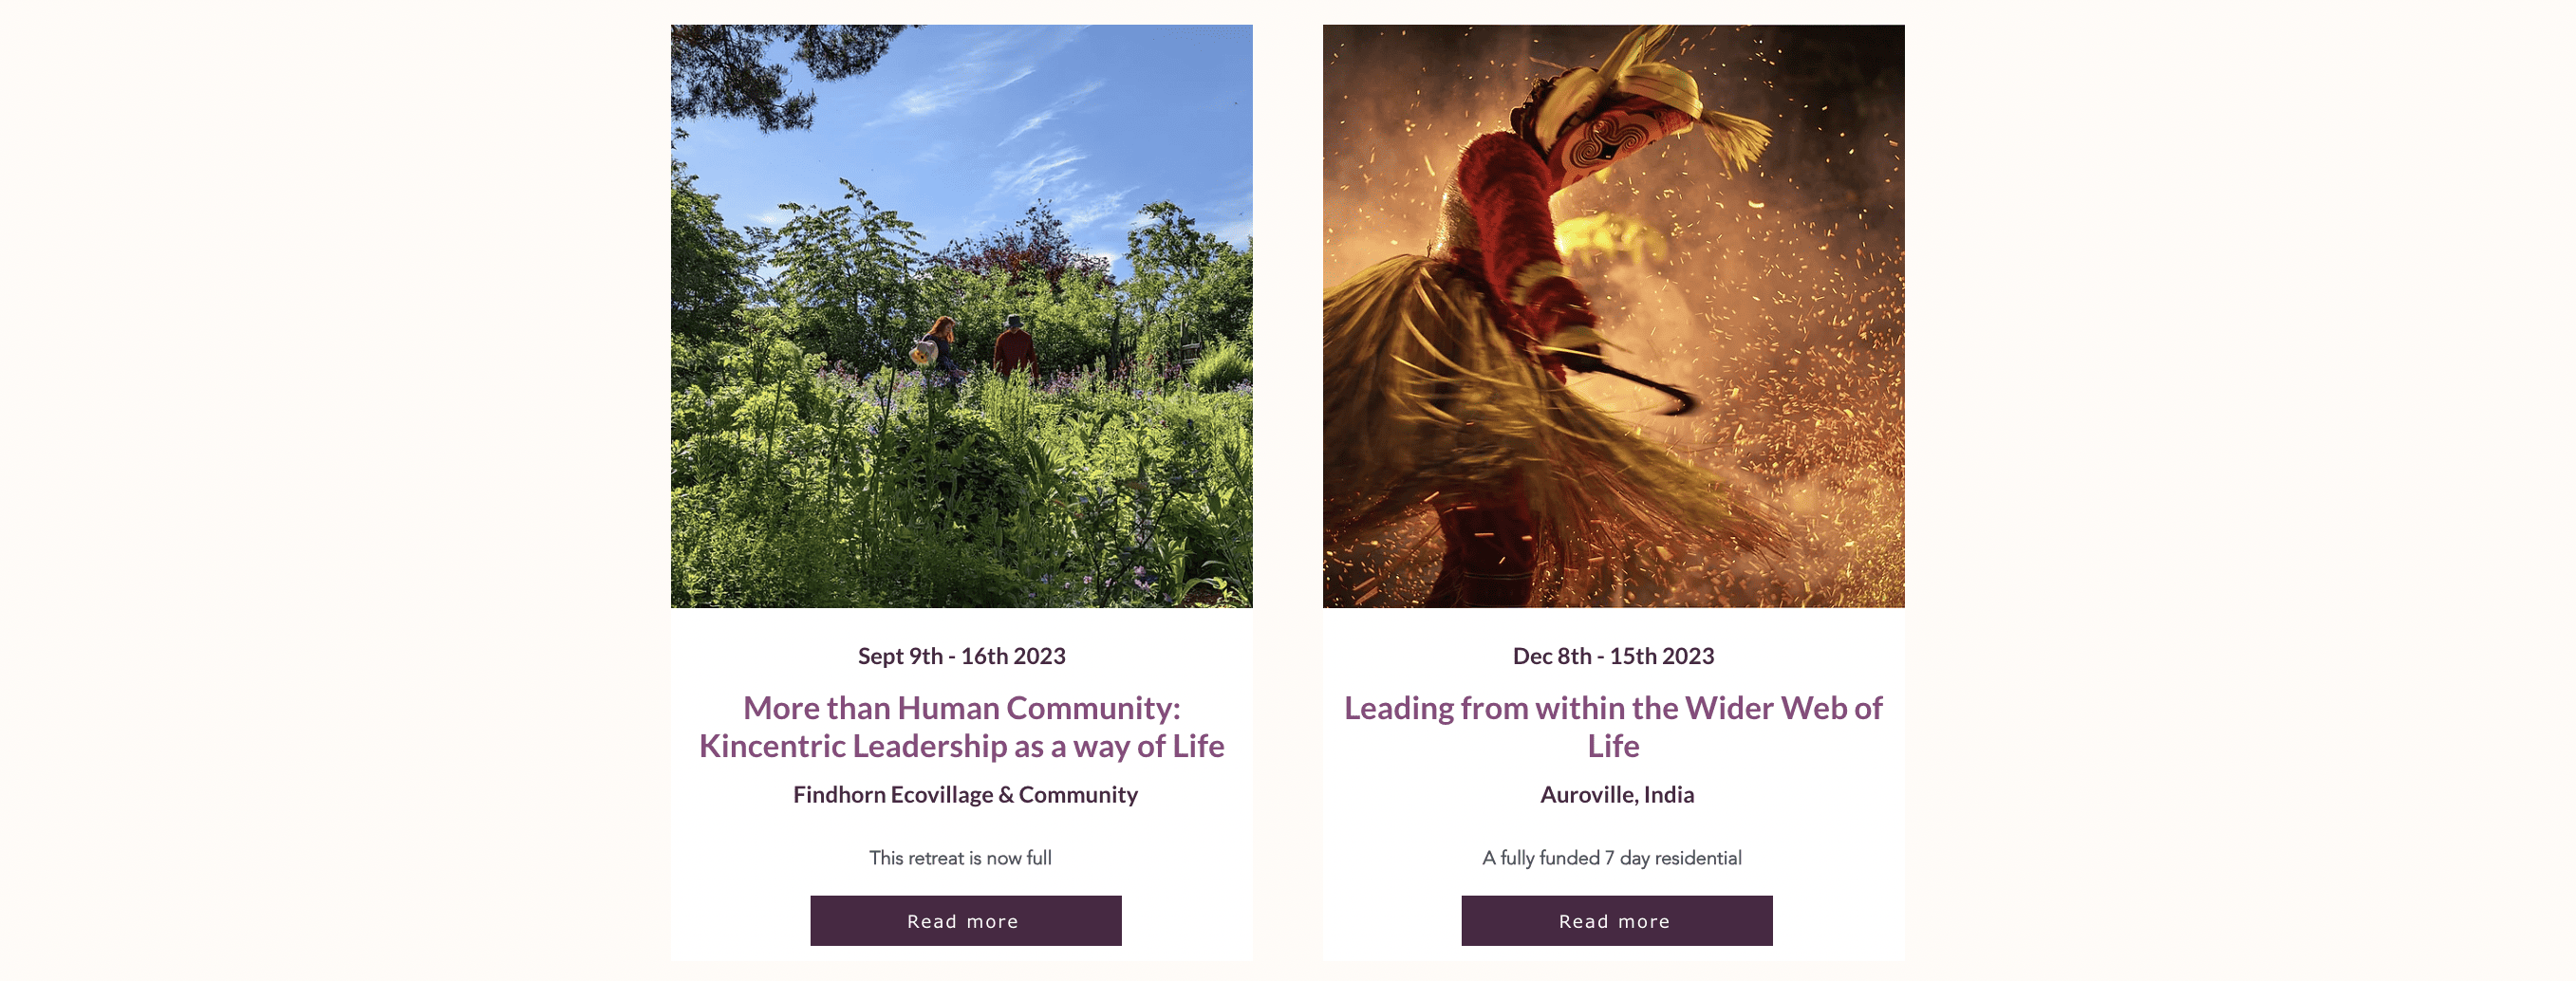 View our two upcoming reteats as pictured online at https://www.kincentricleadership.org/events